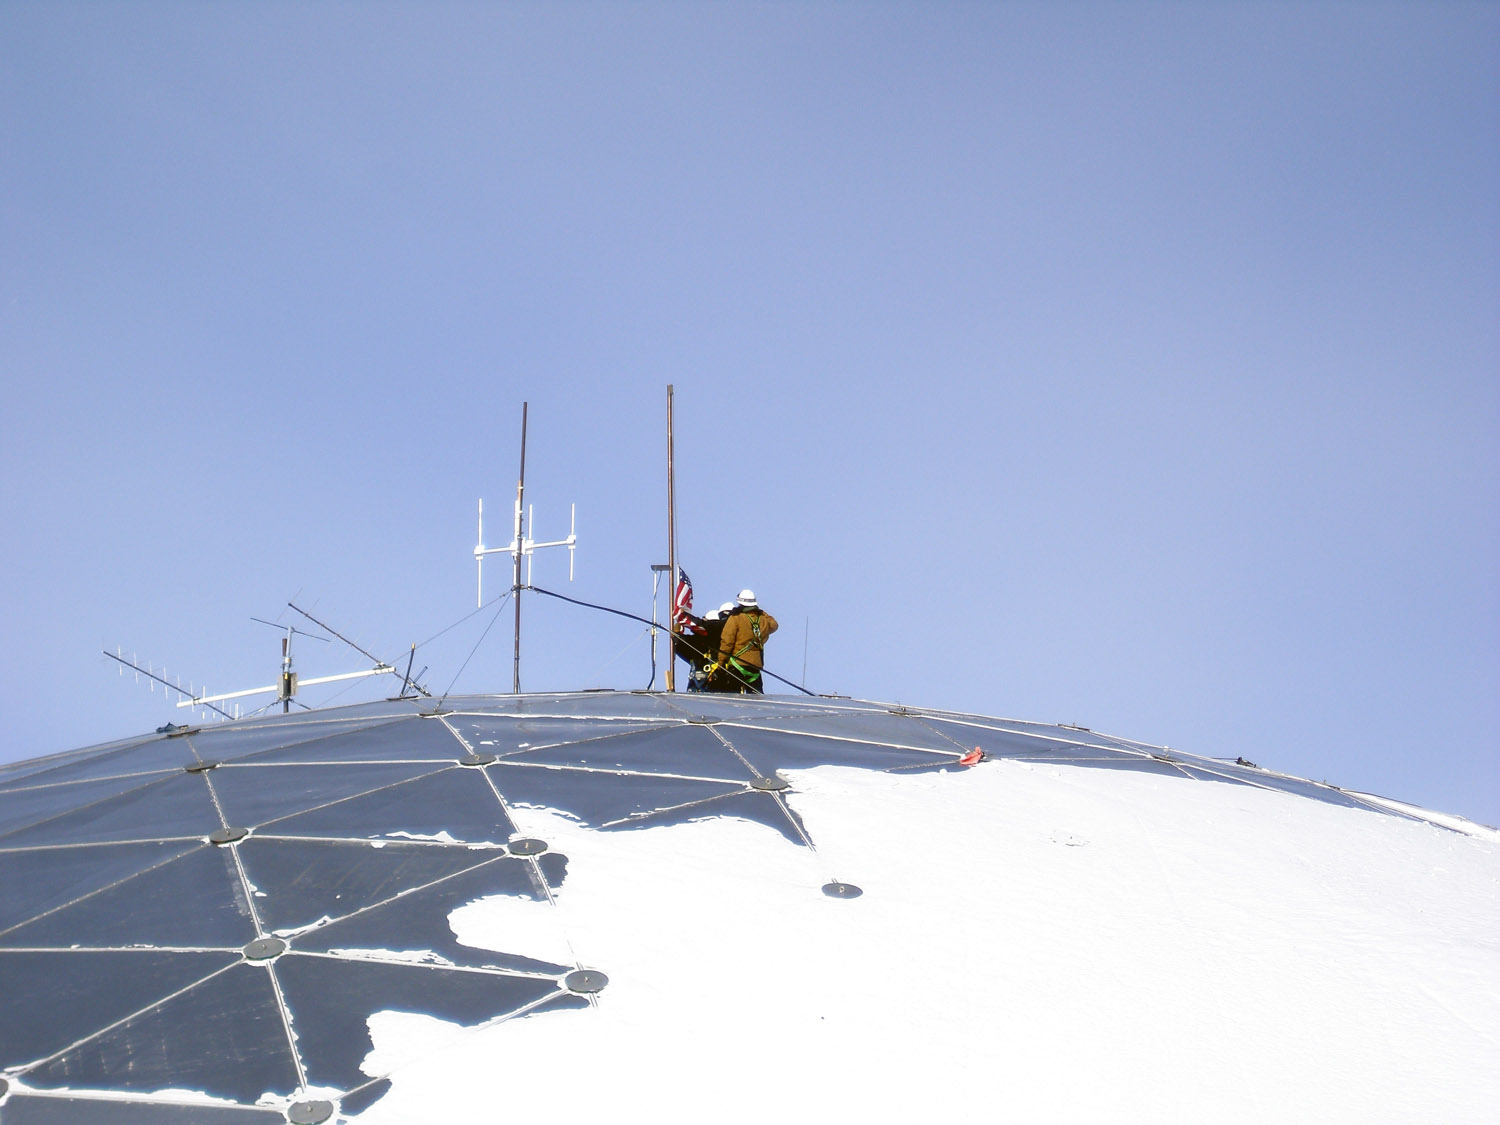 South Pole Dome - Lowering The Flag - 2